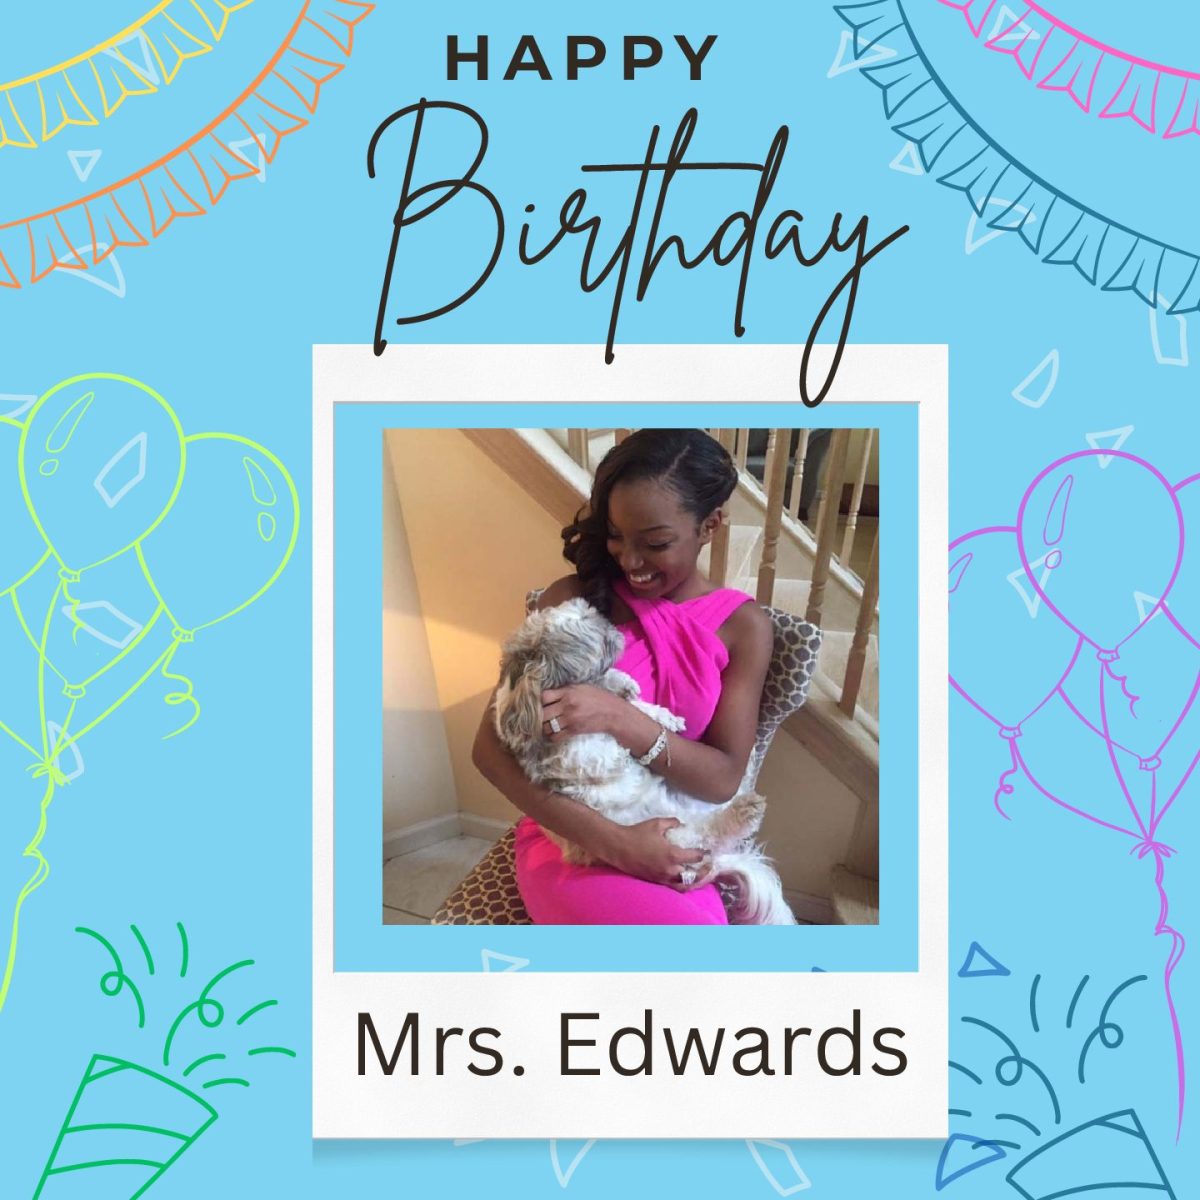 Happy Birthday Ms. Edwards! Wishing you the best in the coming years!